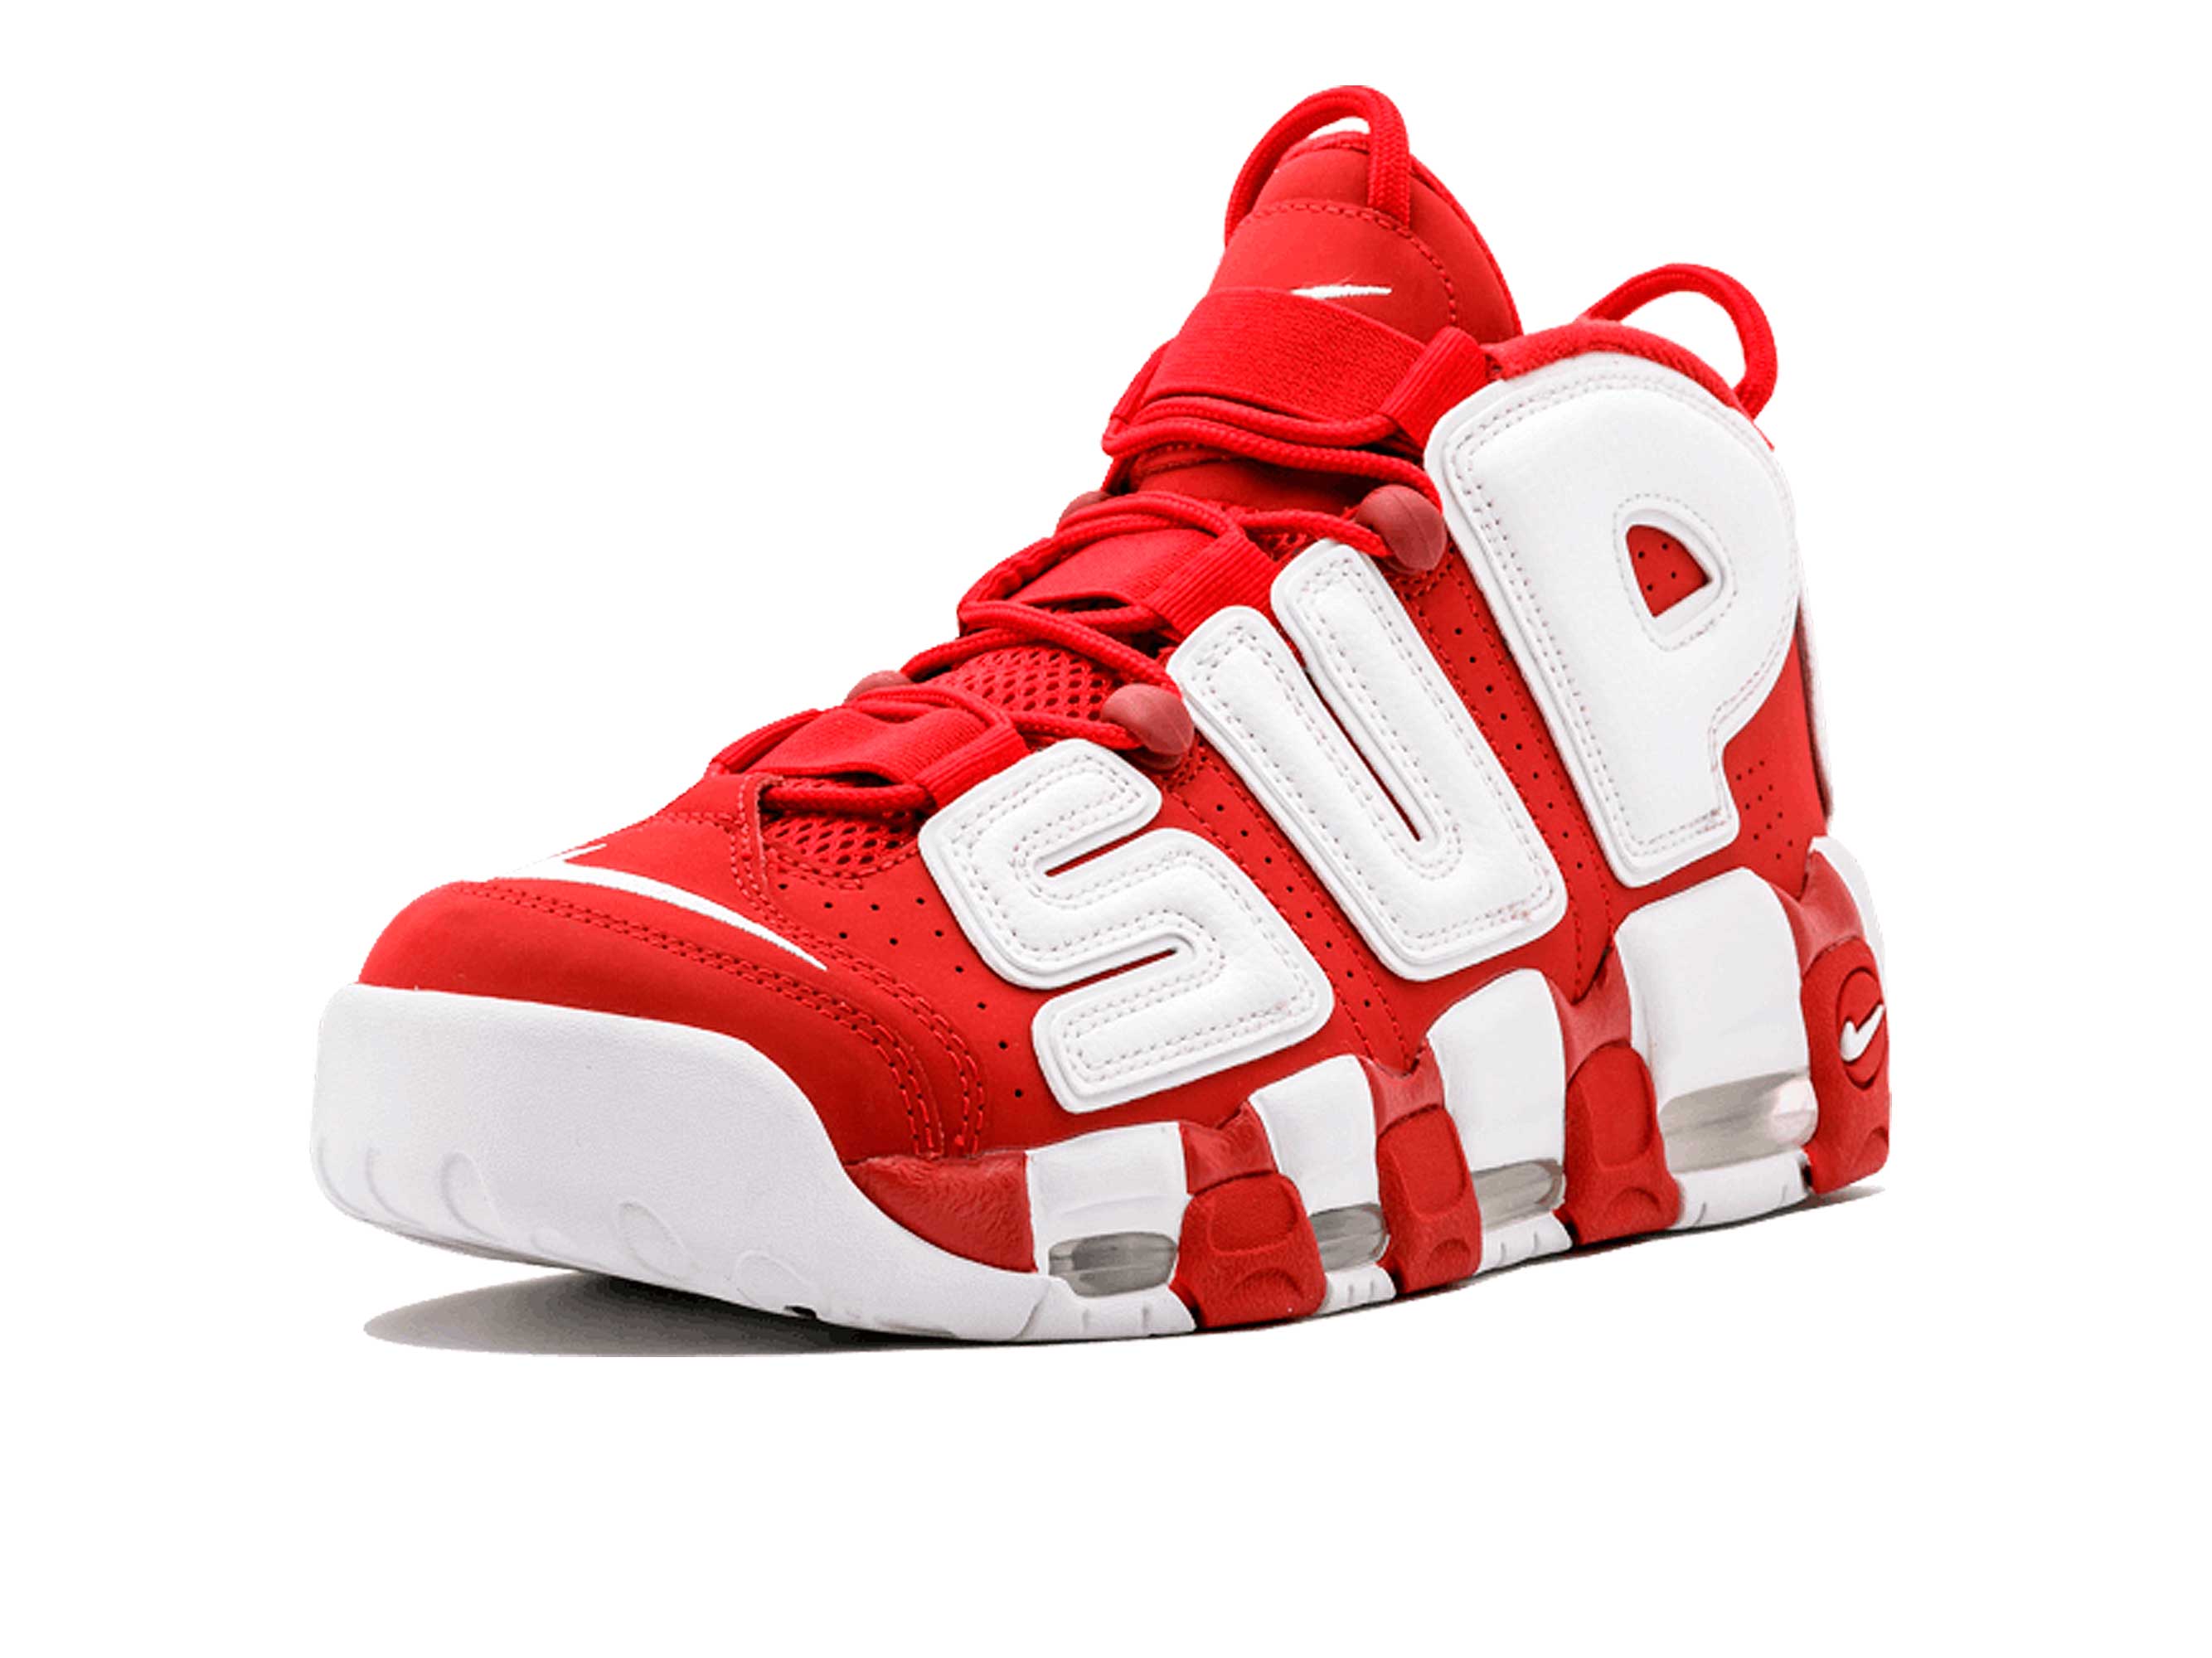 Nike air more uptempo red. Nike Air Uptempo White Red. Nike Air more Uptempo Supreme. Nike Air more Uptempo Red White. Nike Air more Uptempo 96 White Red.